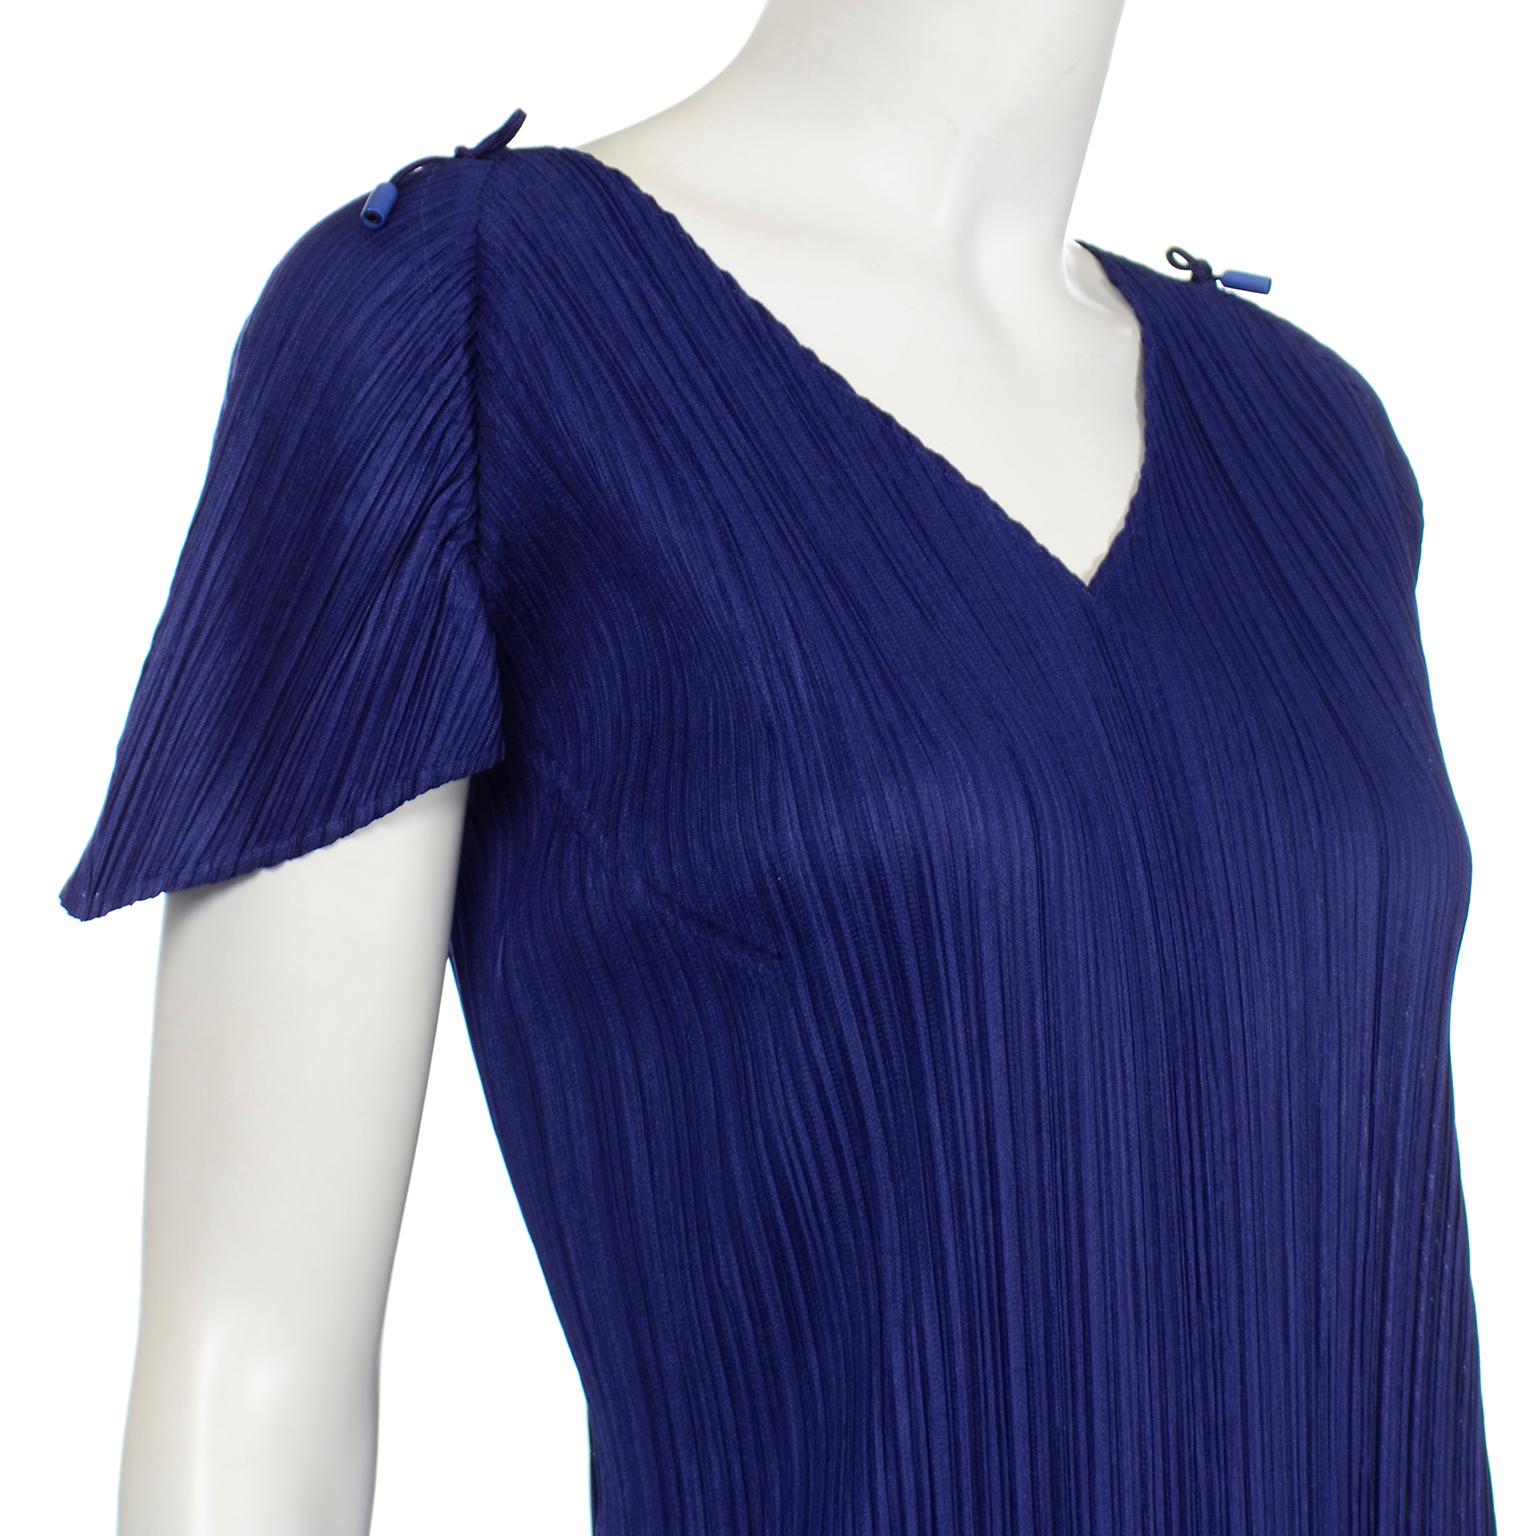 Issey Miyake Pleats Please Blue Dress & Ombre Jacket Outfit 5